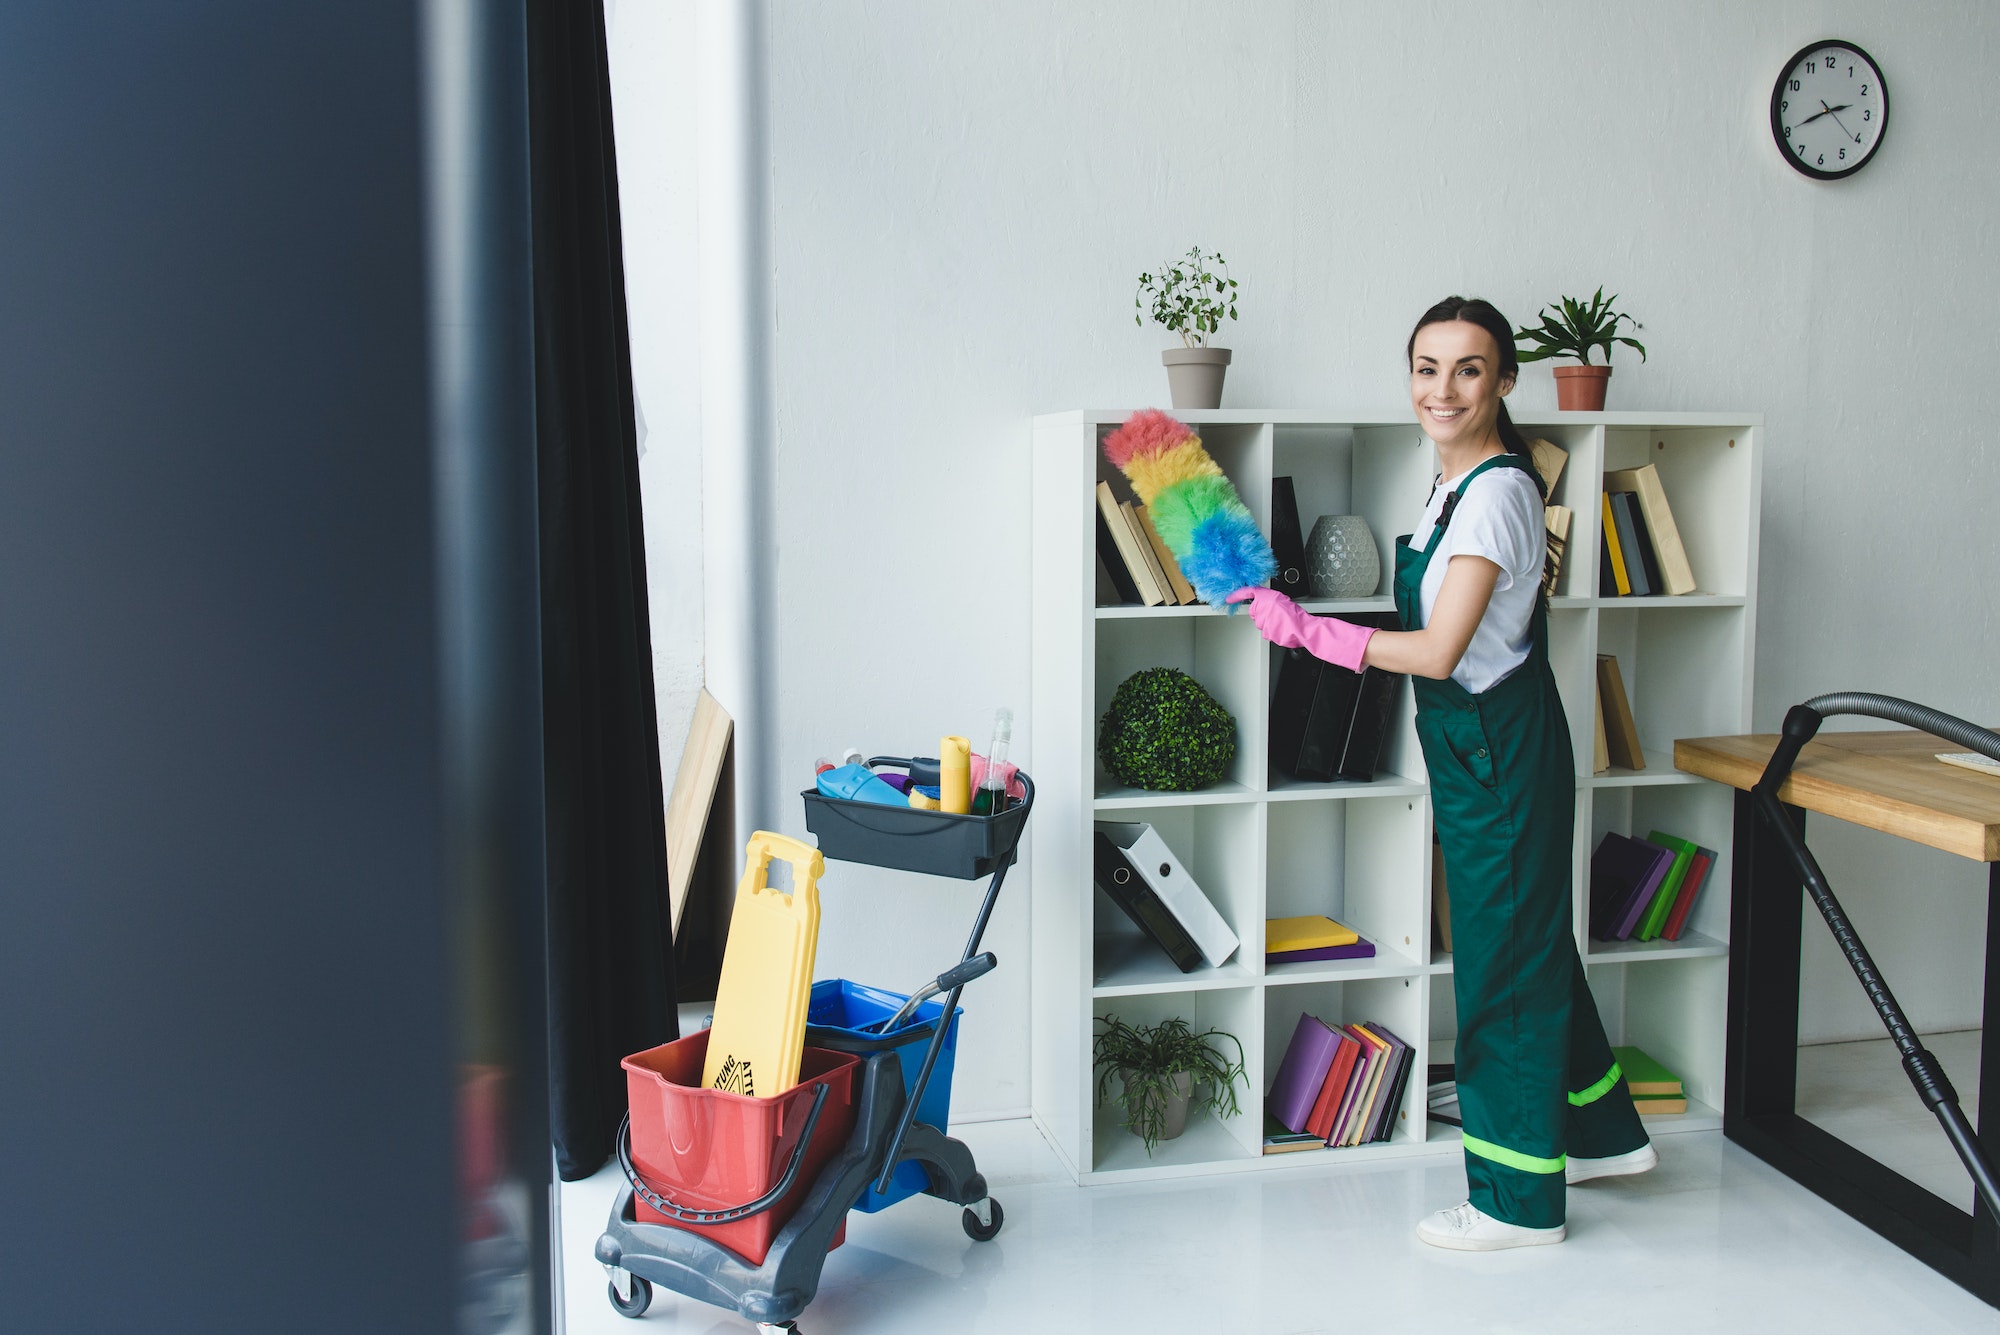 young cleaner holding duster and smiling at camera while cleaning shelves in office